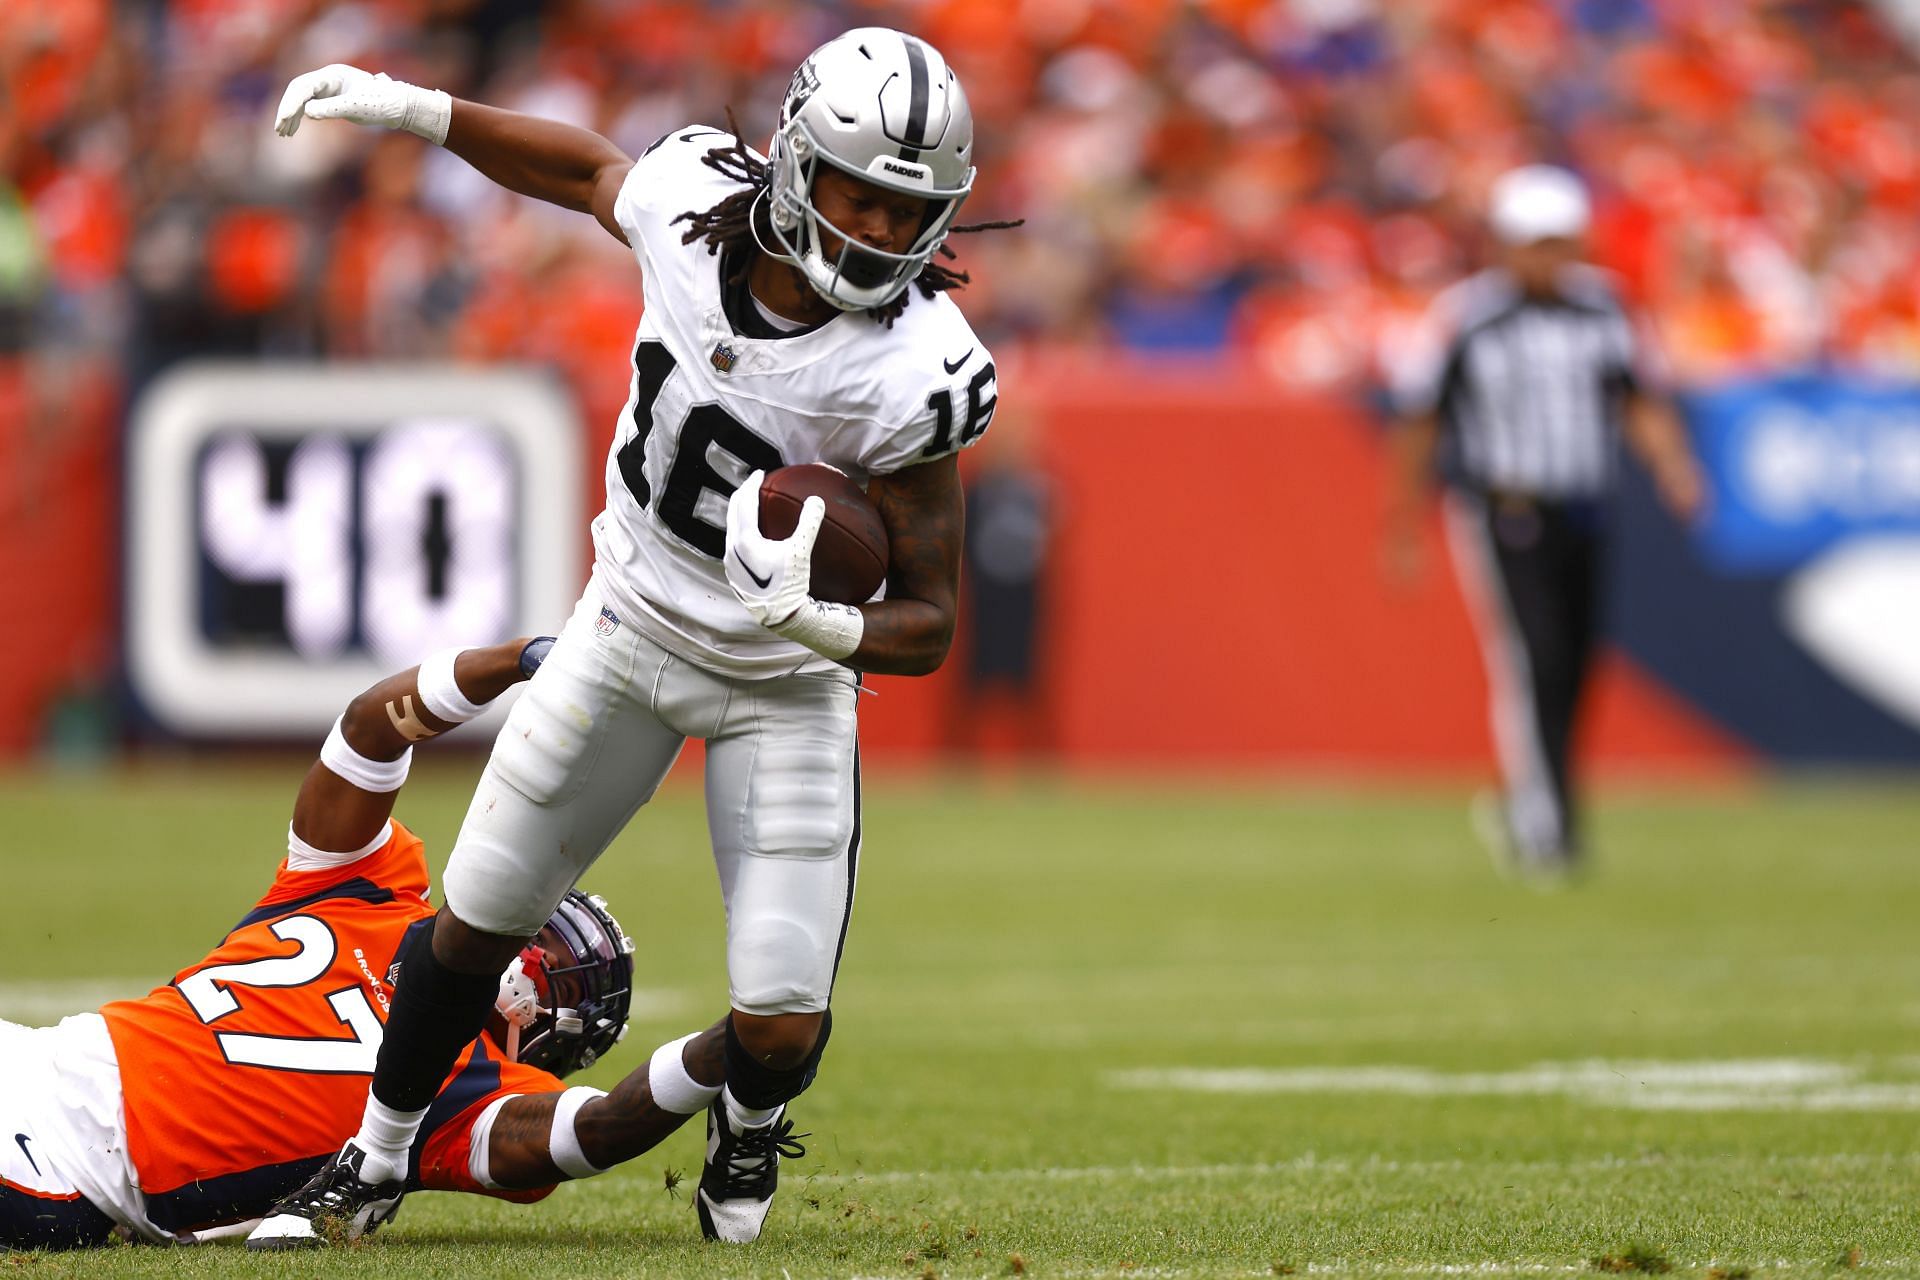 Notable #NFL injuries in the 2nd batch of afternoon games: #Raiders Ja, jakobi meyers hit